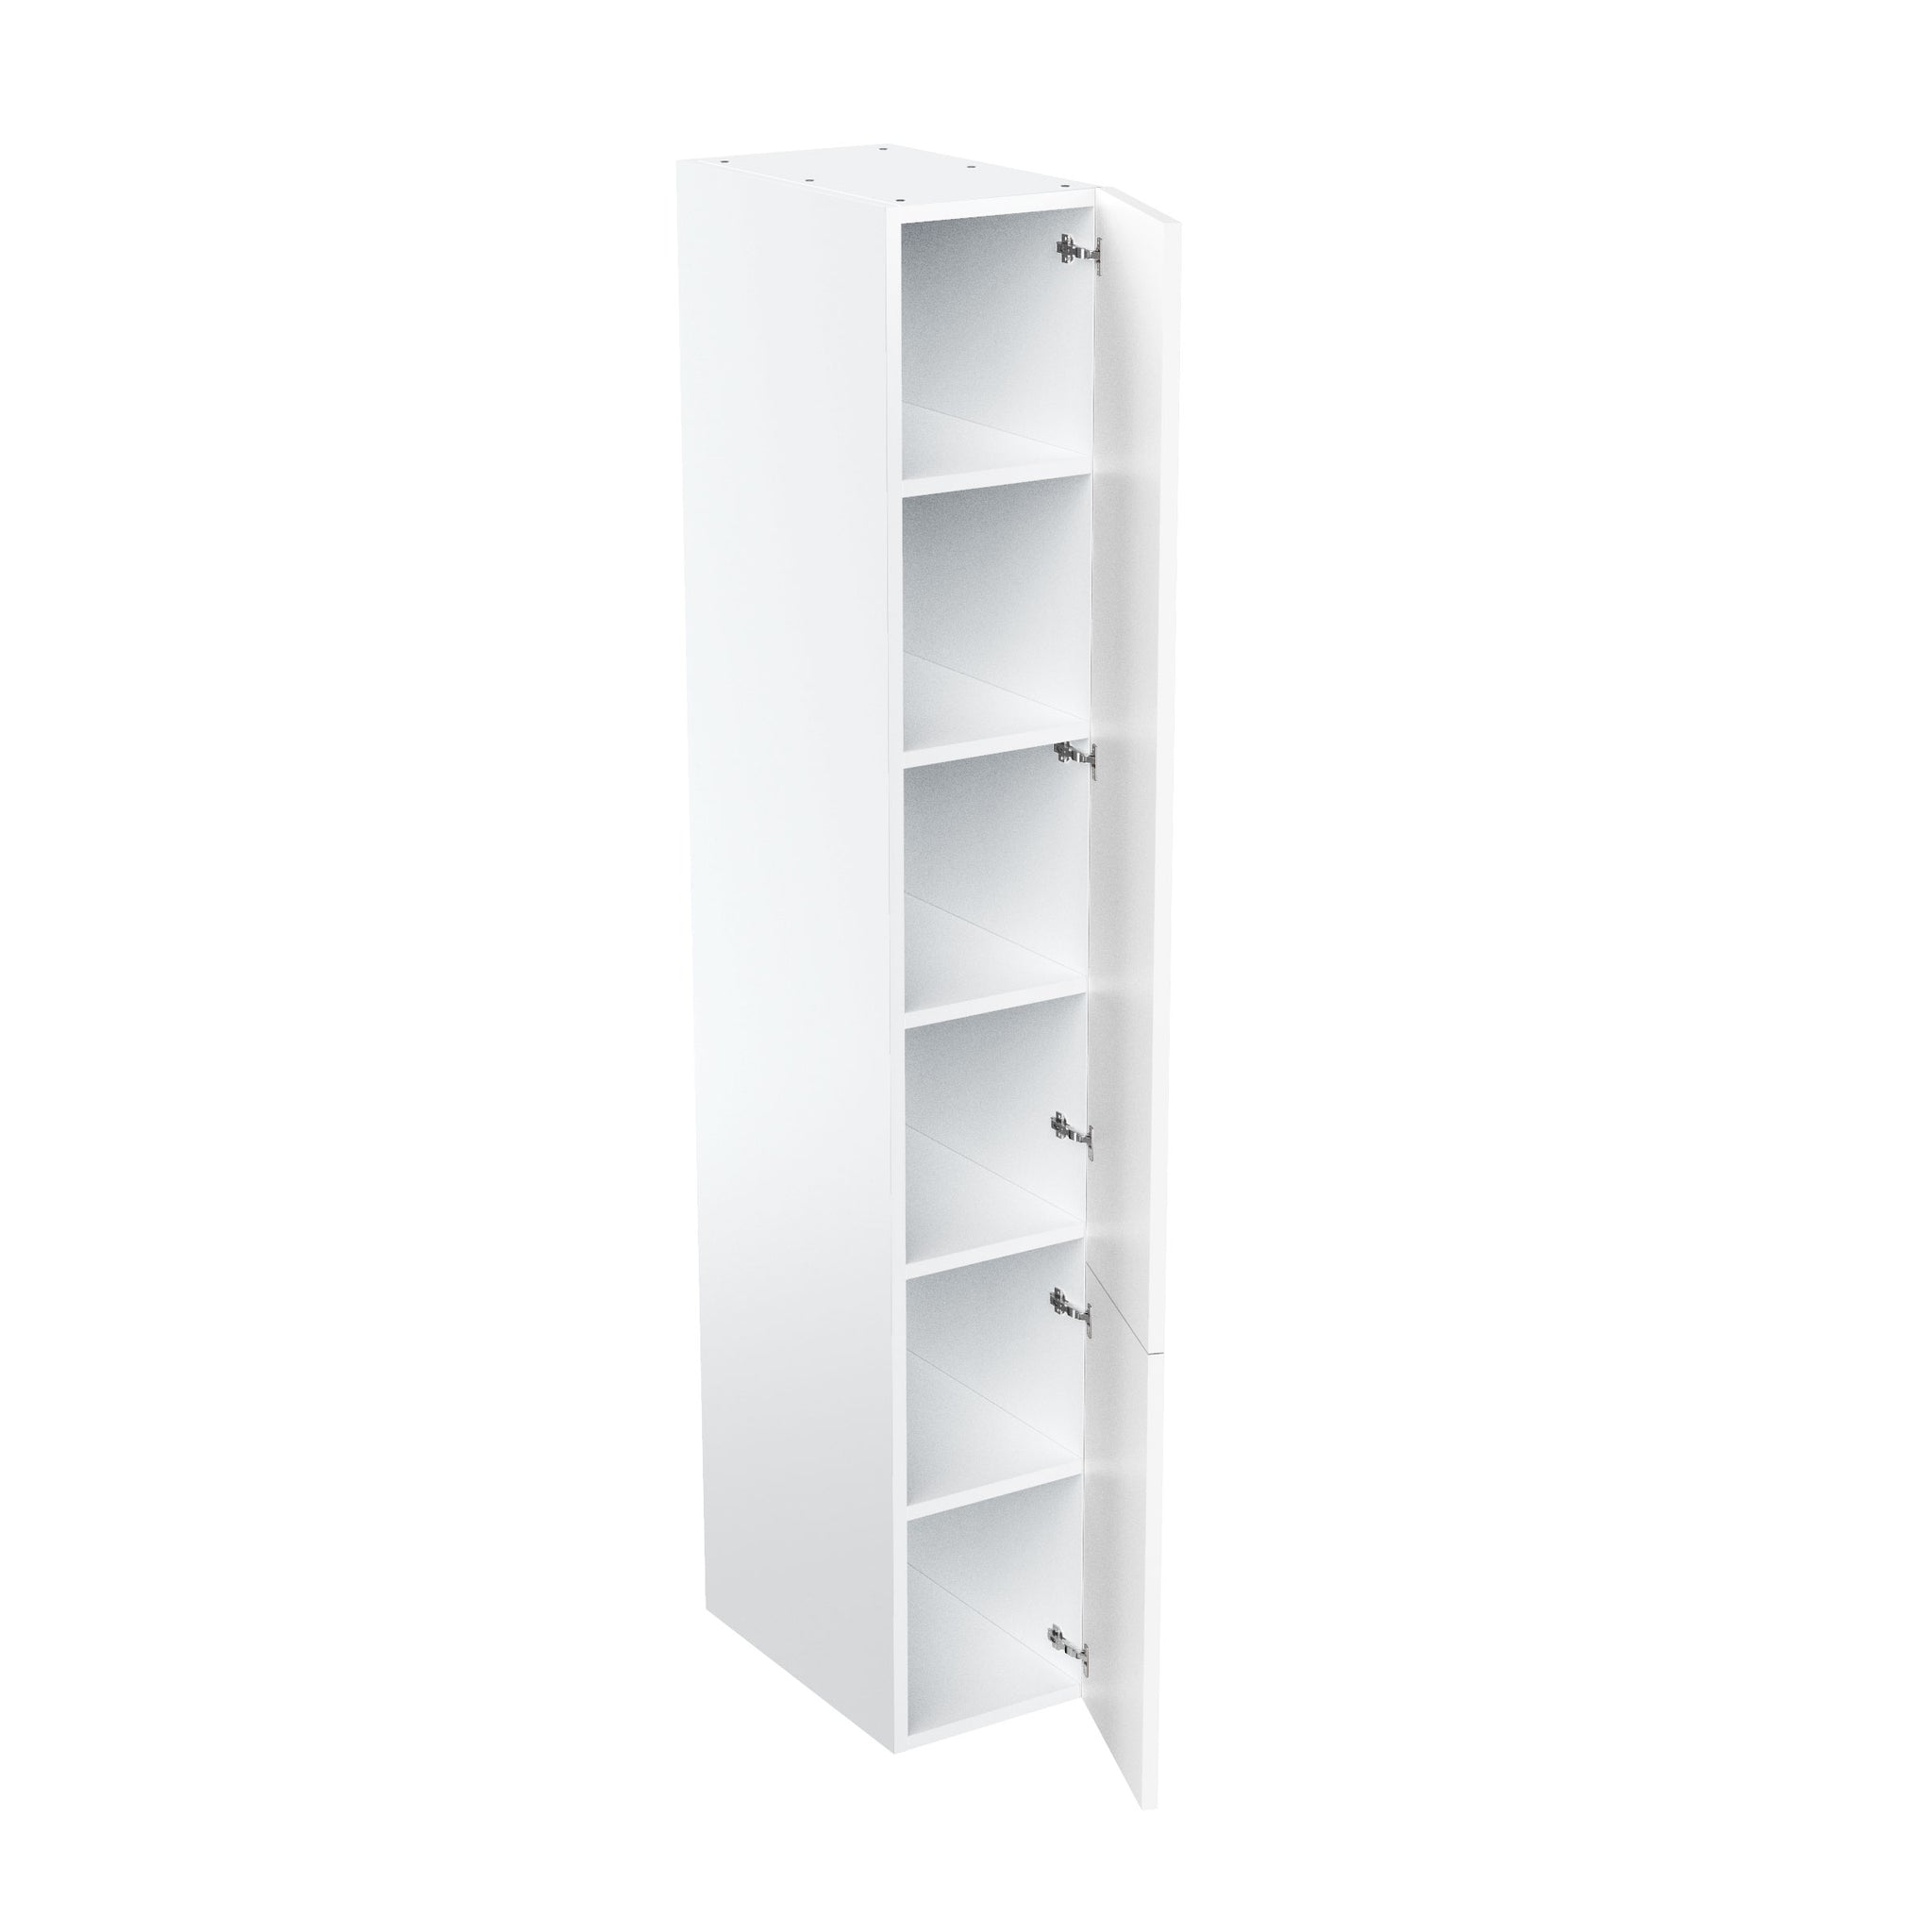 RTA - Glossy White - Single Door Tall Cabinets | 15"W x 96"H x 23.8"D